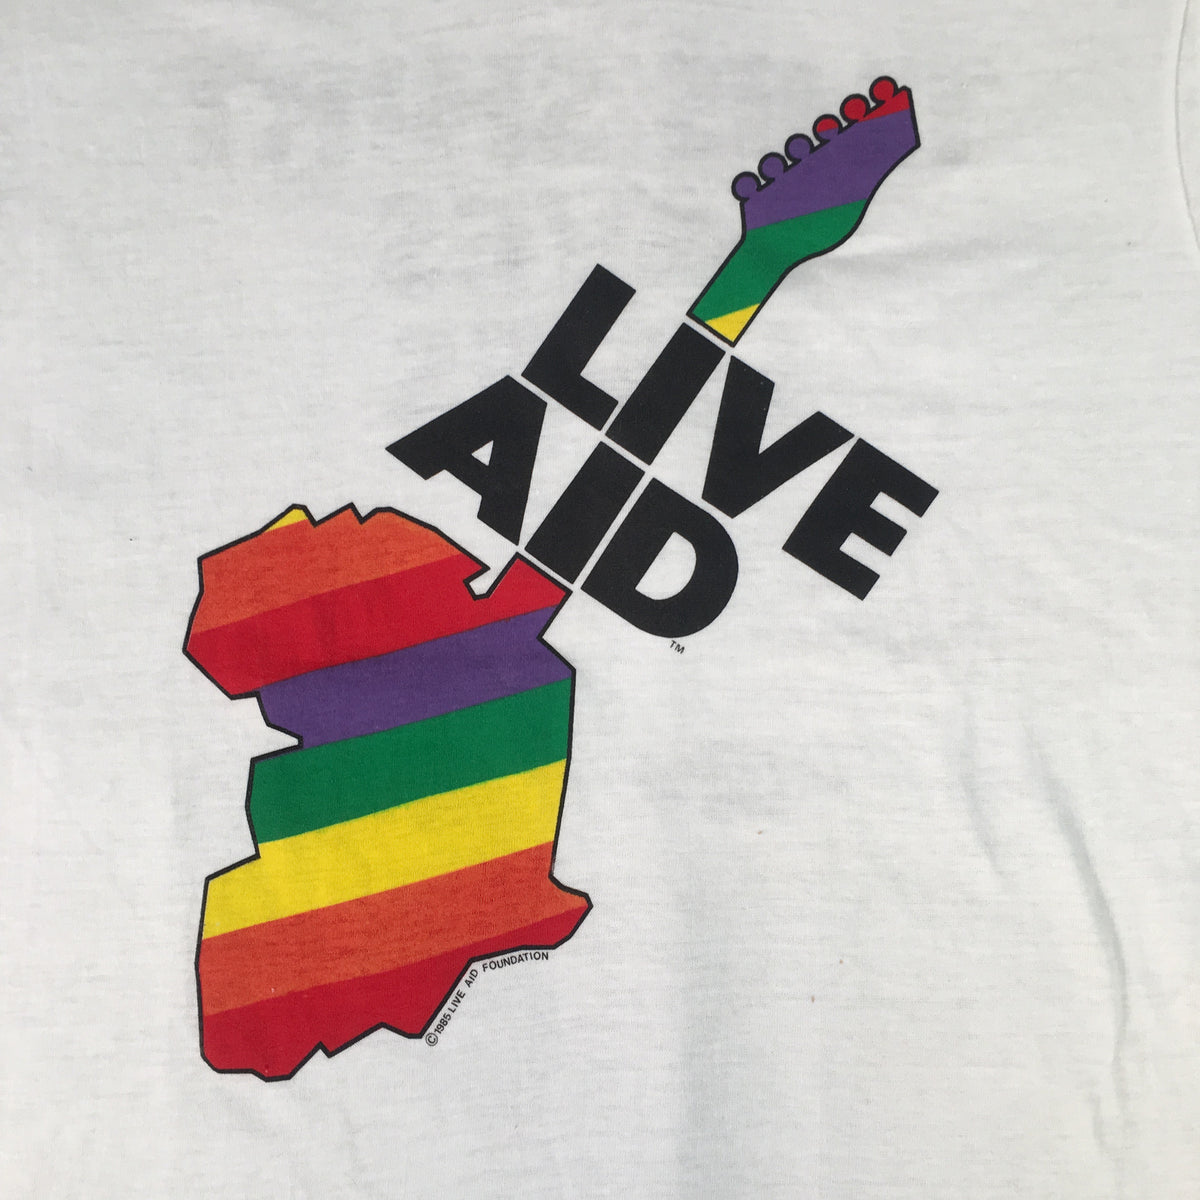 Vintage Live Aid &quot;This Shirt Saves Lives&quot; T-Shirt - jointcustodydc